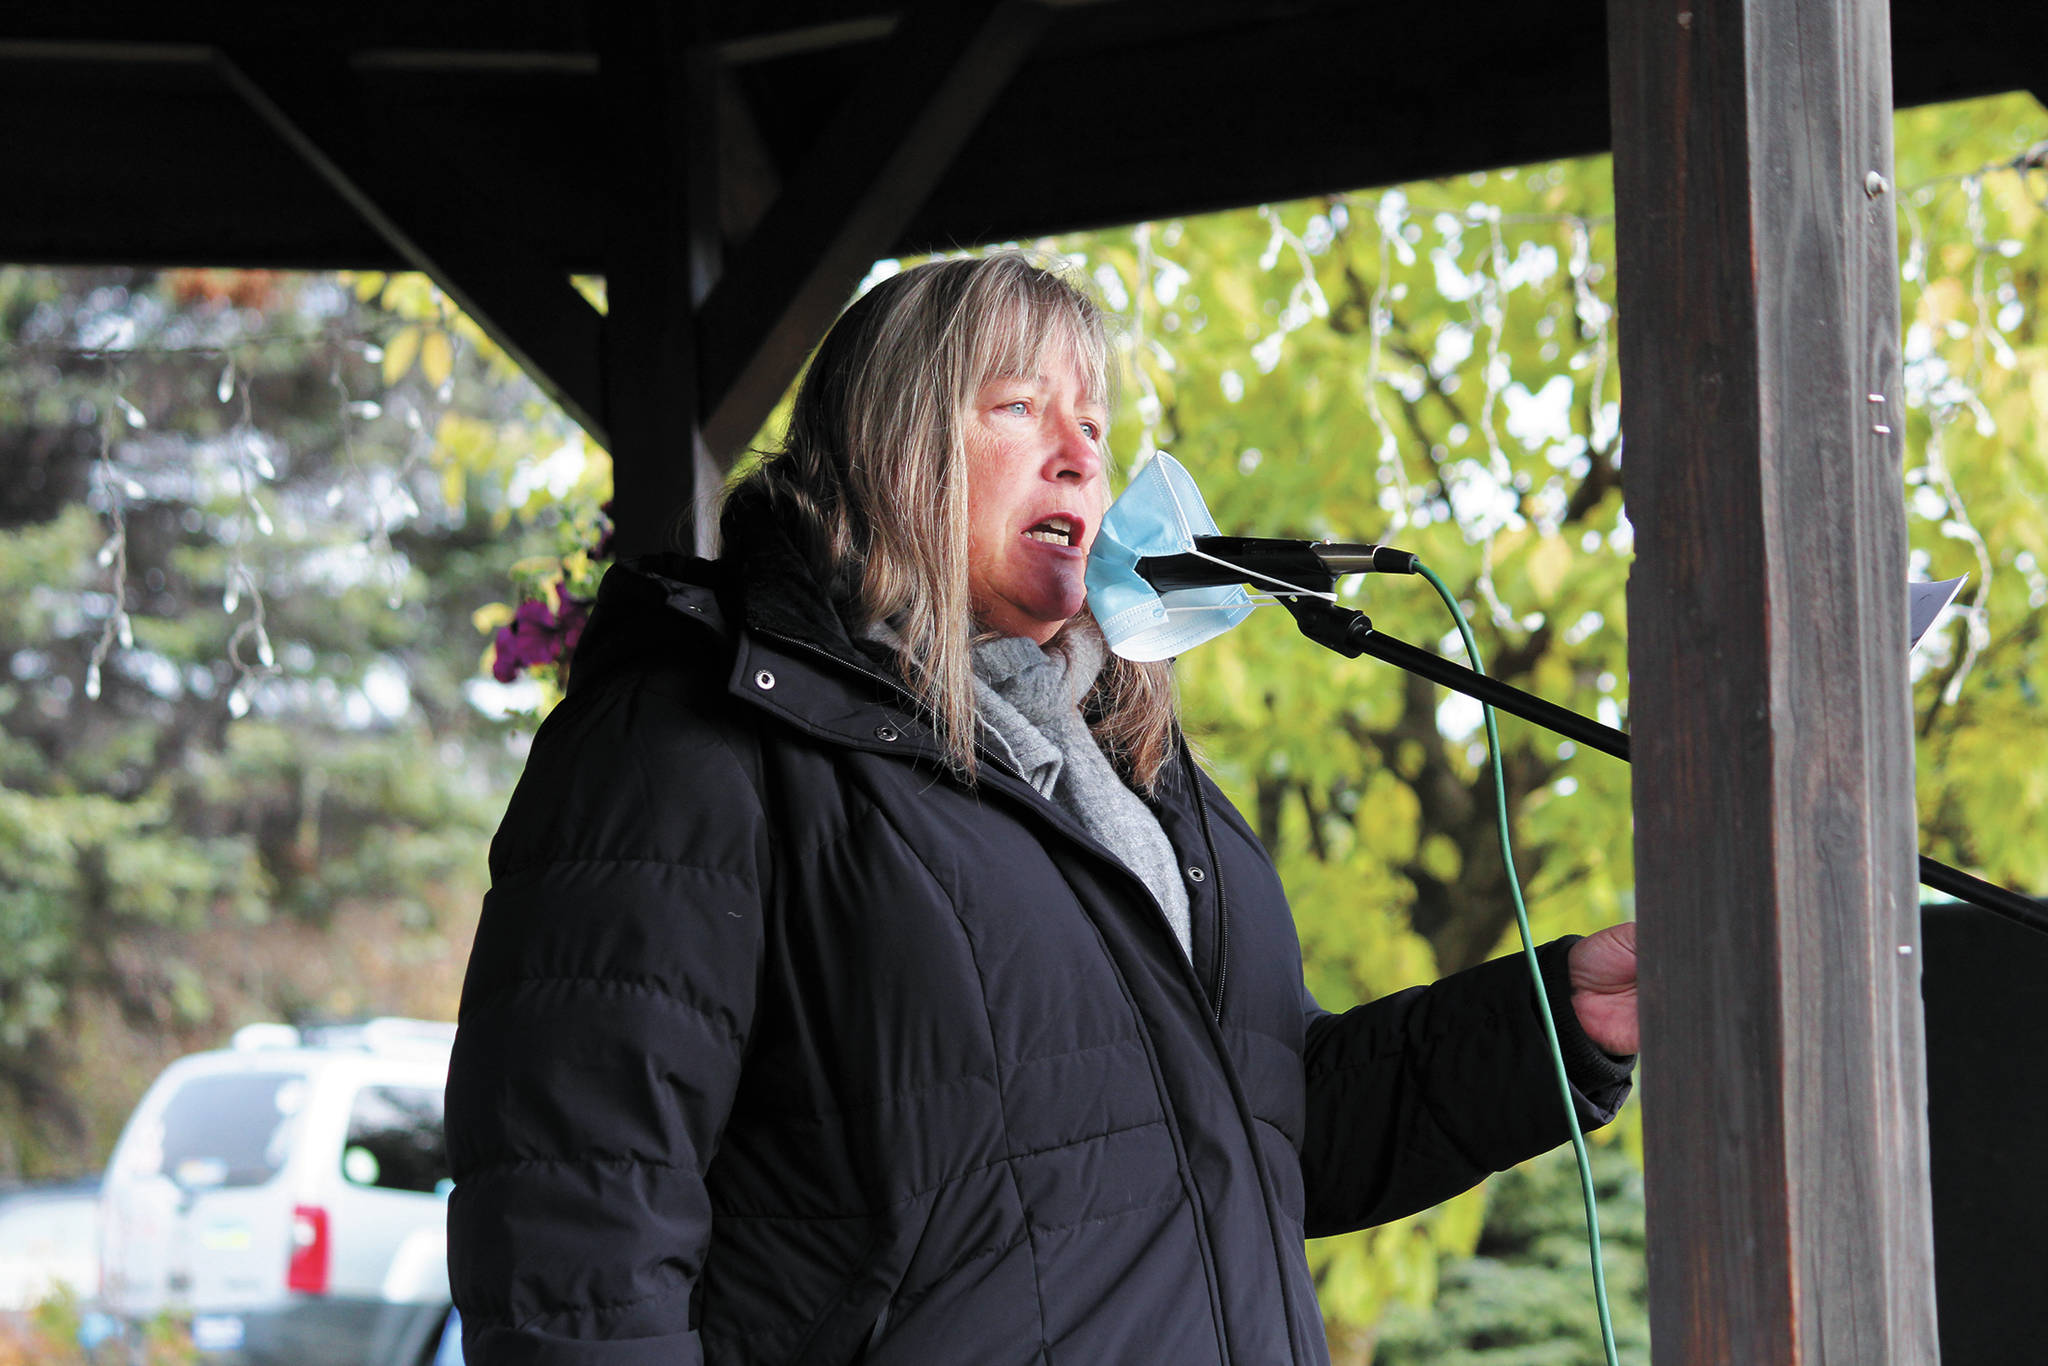 Julia Person speaks at a rally to commemorate Ruth Bader Ginsburg and protest swift action to replace her on the Supreme Court held Saturday, Oct. 17, 2020 at WKFL Park in Homer, Alaska. (Photo by Megan Pacer/Homer News)